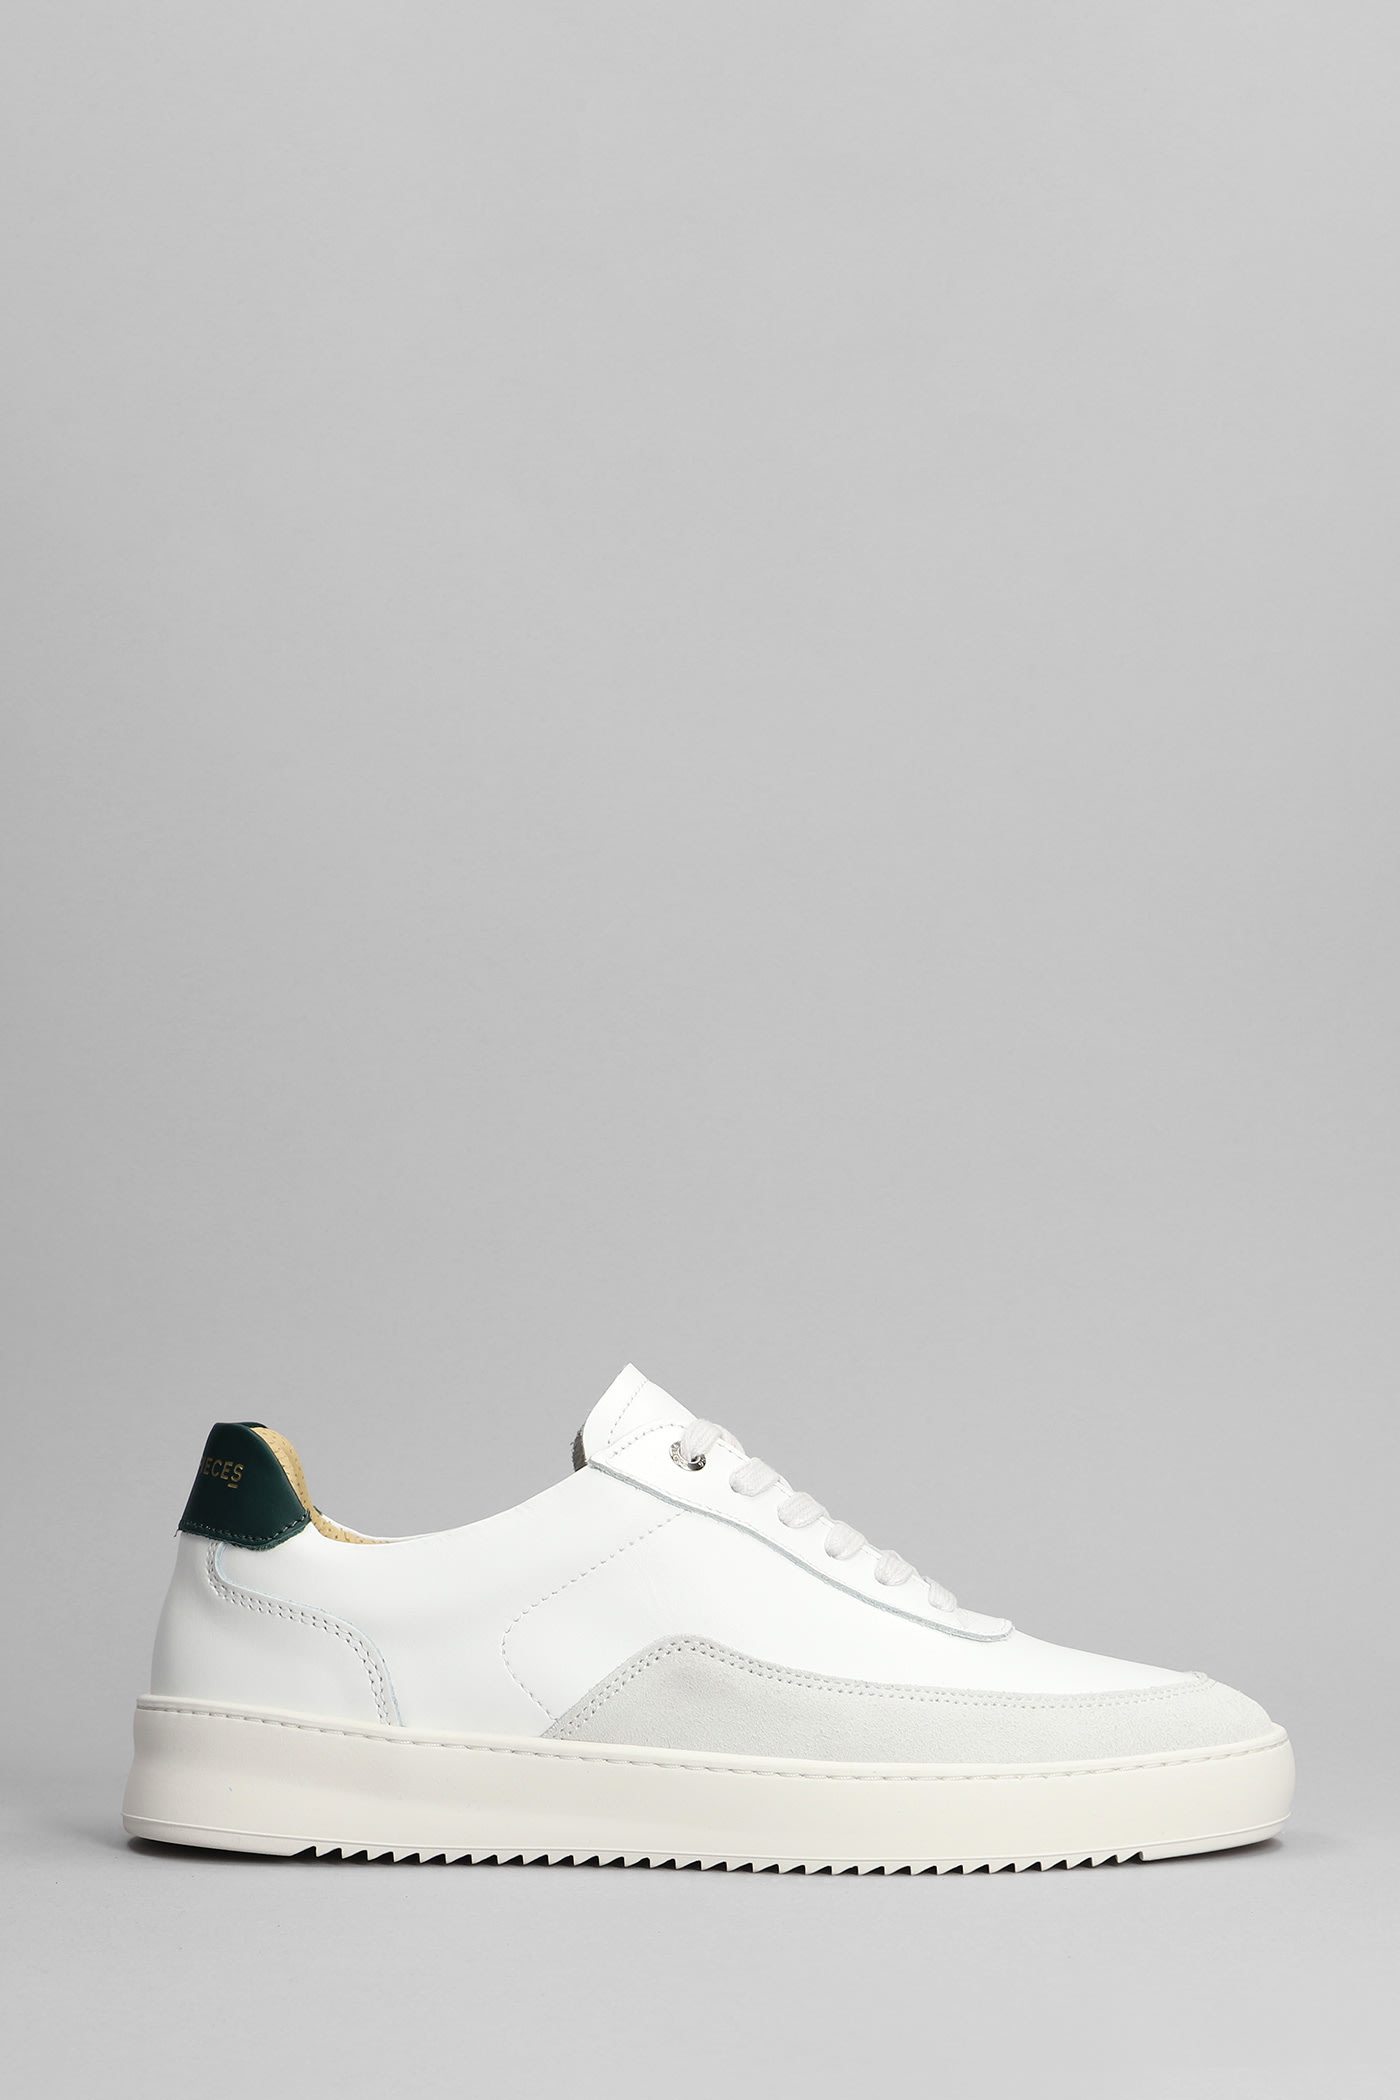 Filling Pieces Mondo Squash Sneakers In White Leather